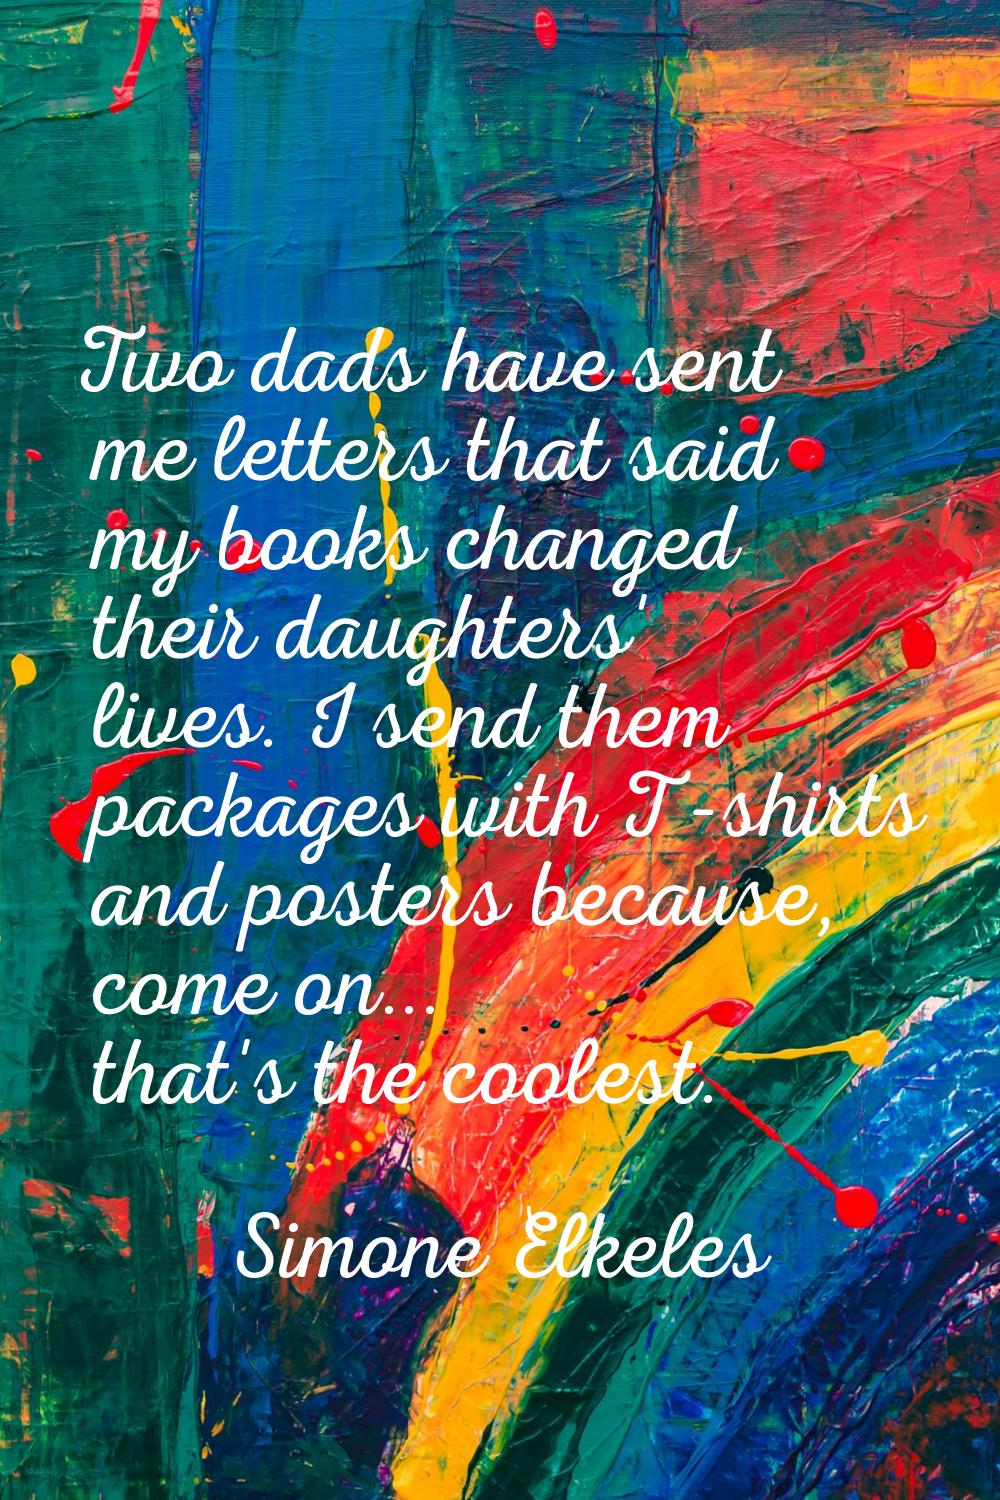 Two dads have sent me letters that said my books changed their daughters' lives. I send them packag